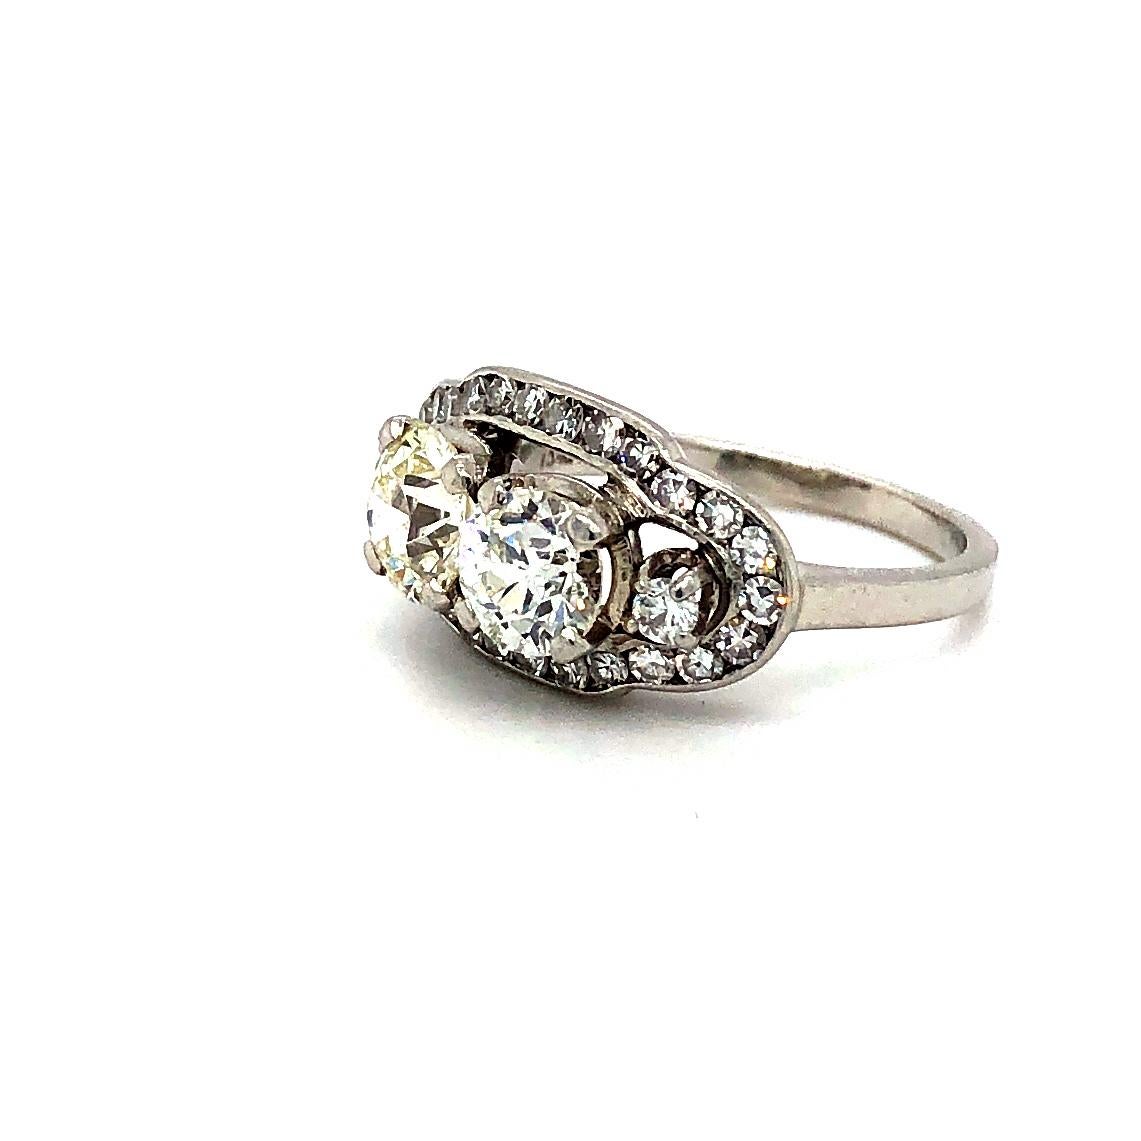 Offered here is a unusual vintage ladies diamond ring. The ring is platinum ( marked plat ) and is a finger size 4.75 but can be sized. The platinum ring weighs 6.0 grams and measures about 10.2 mm wide on top and graduates down to 1.75 mm on the